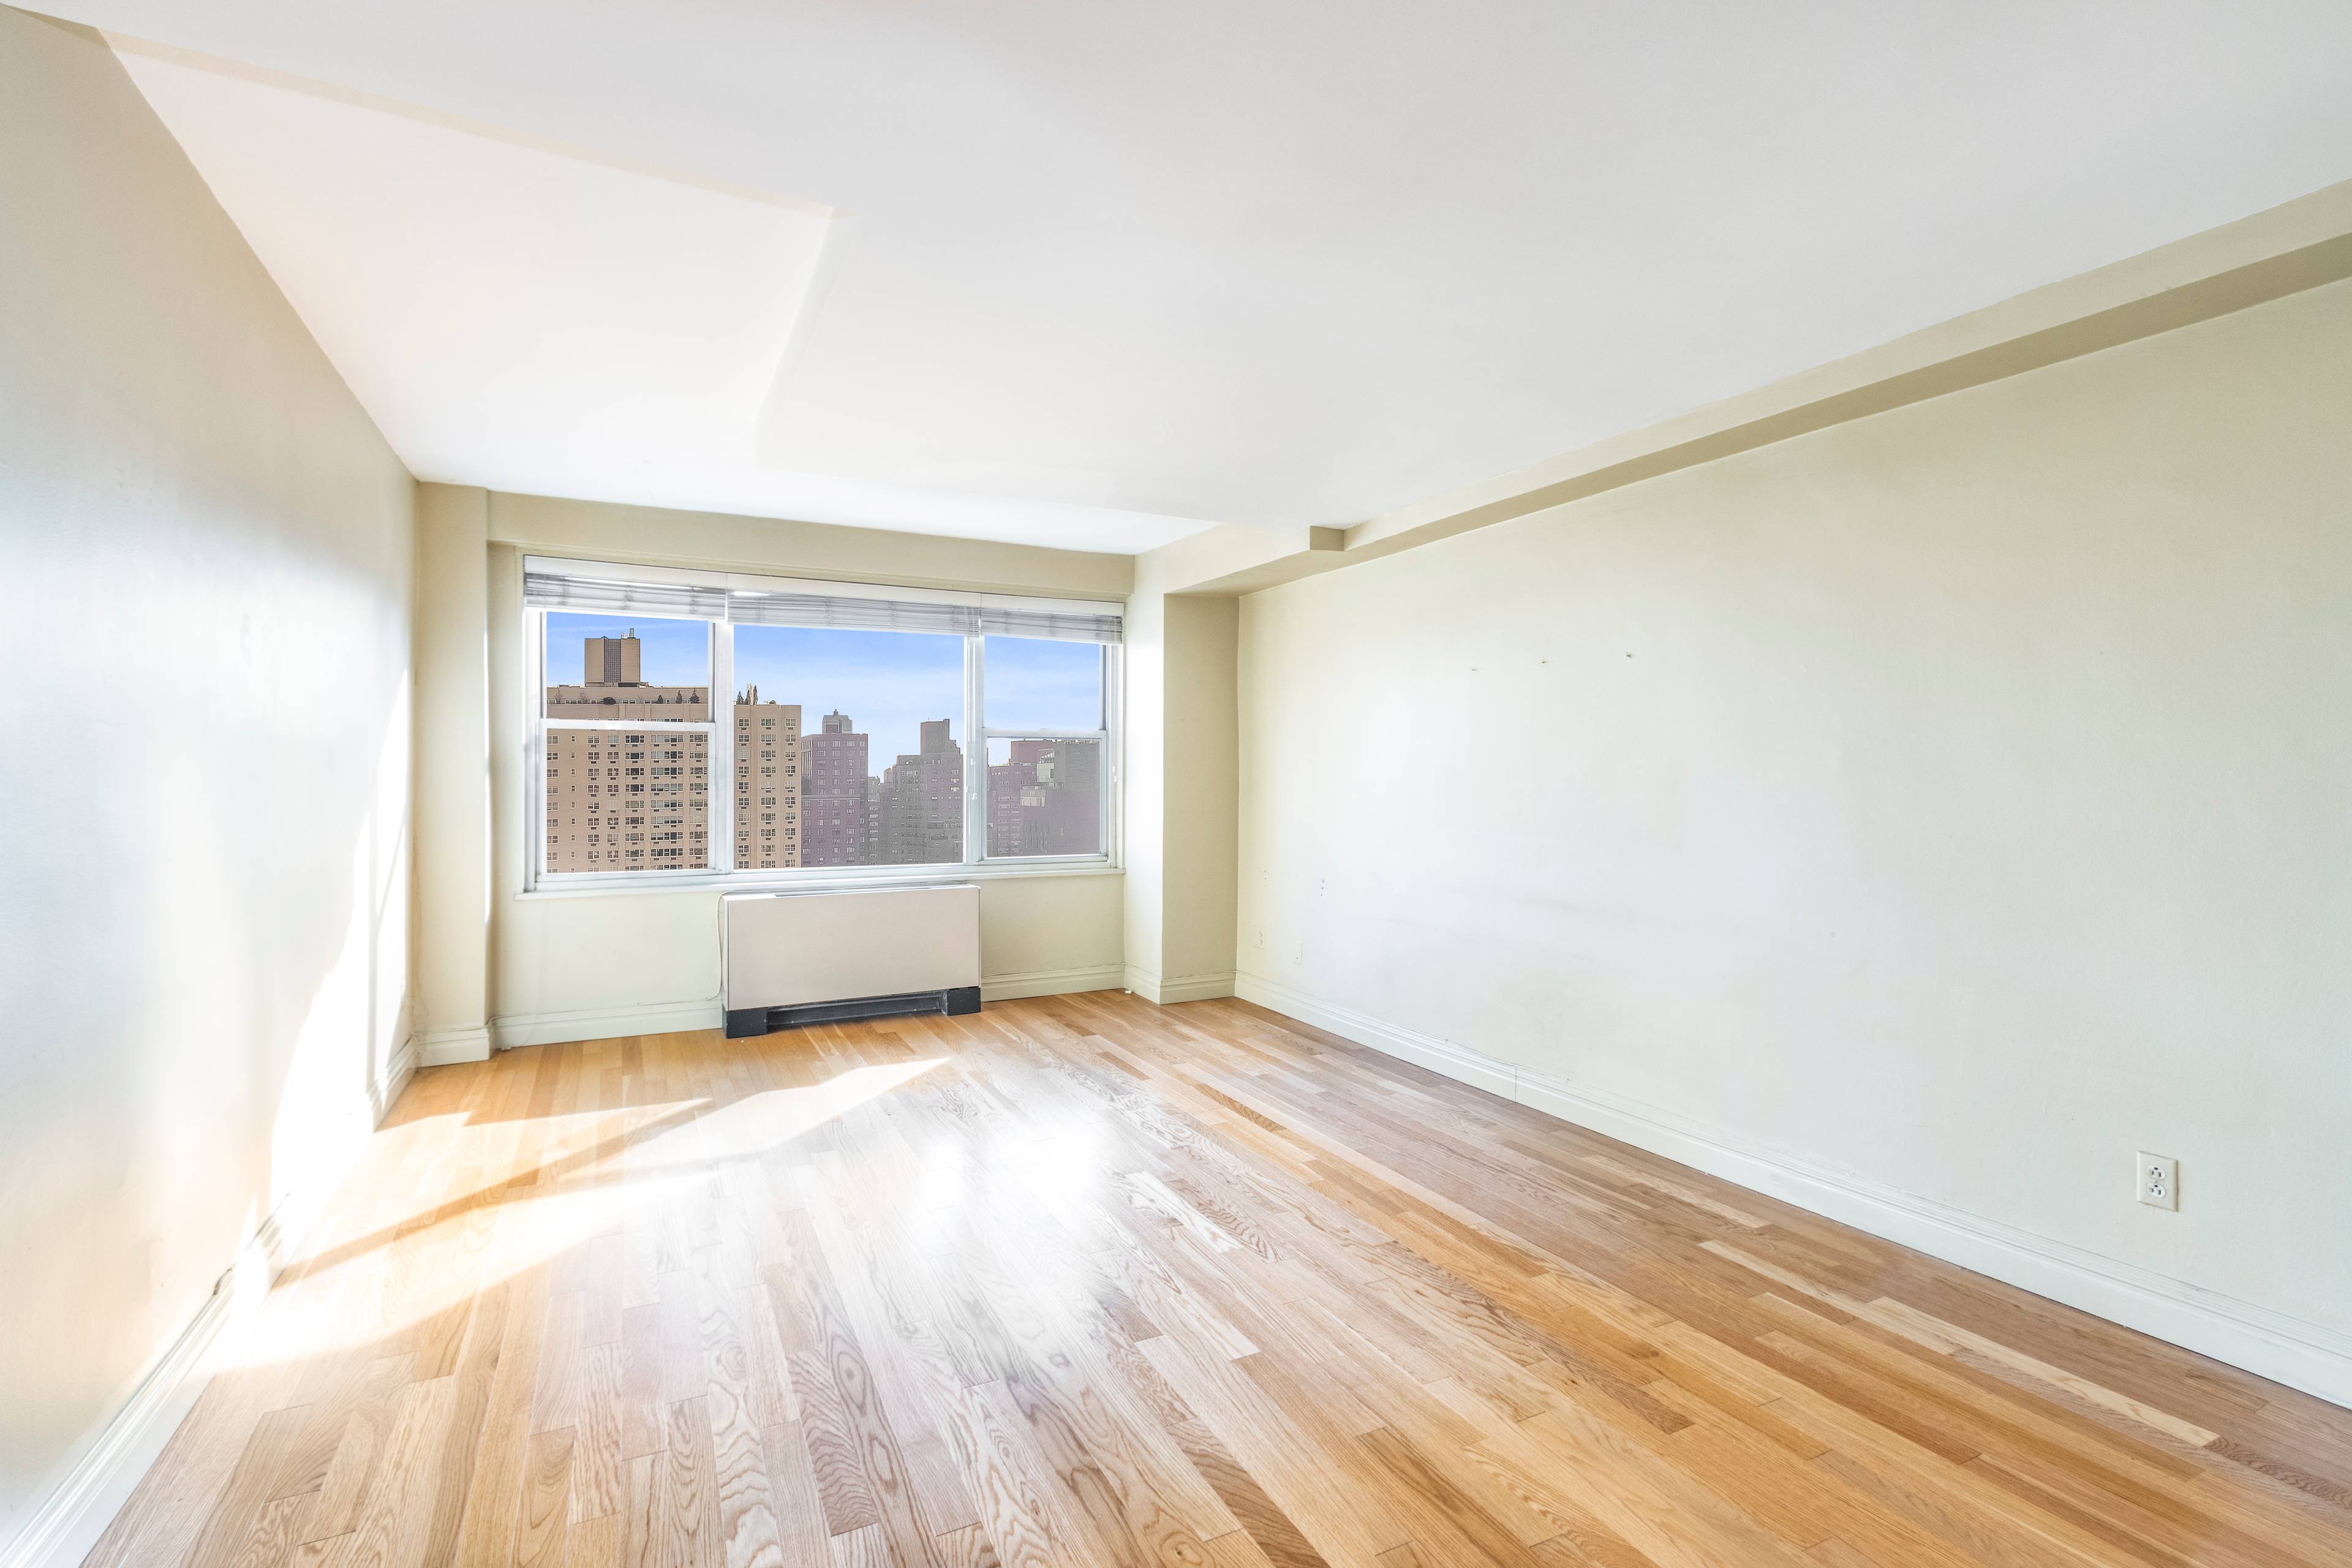 This high floor one bedroom is airy, spacious and flooded with natural light from Eastern and Southern exposures.